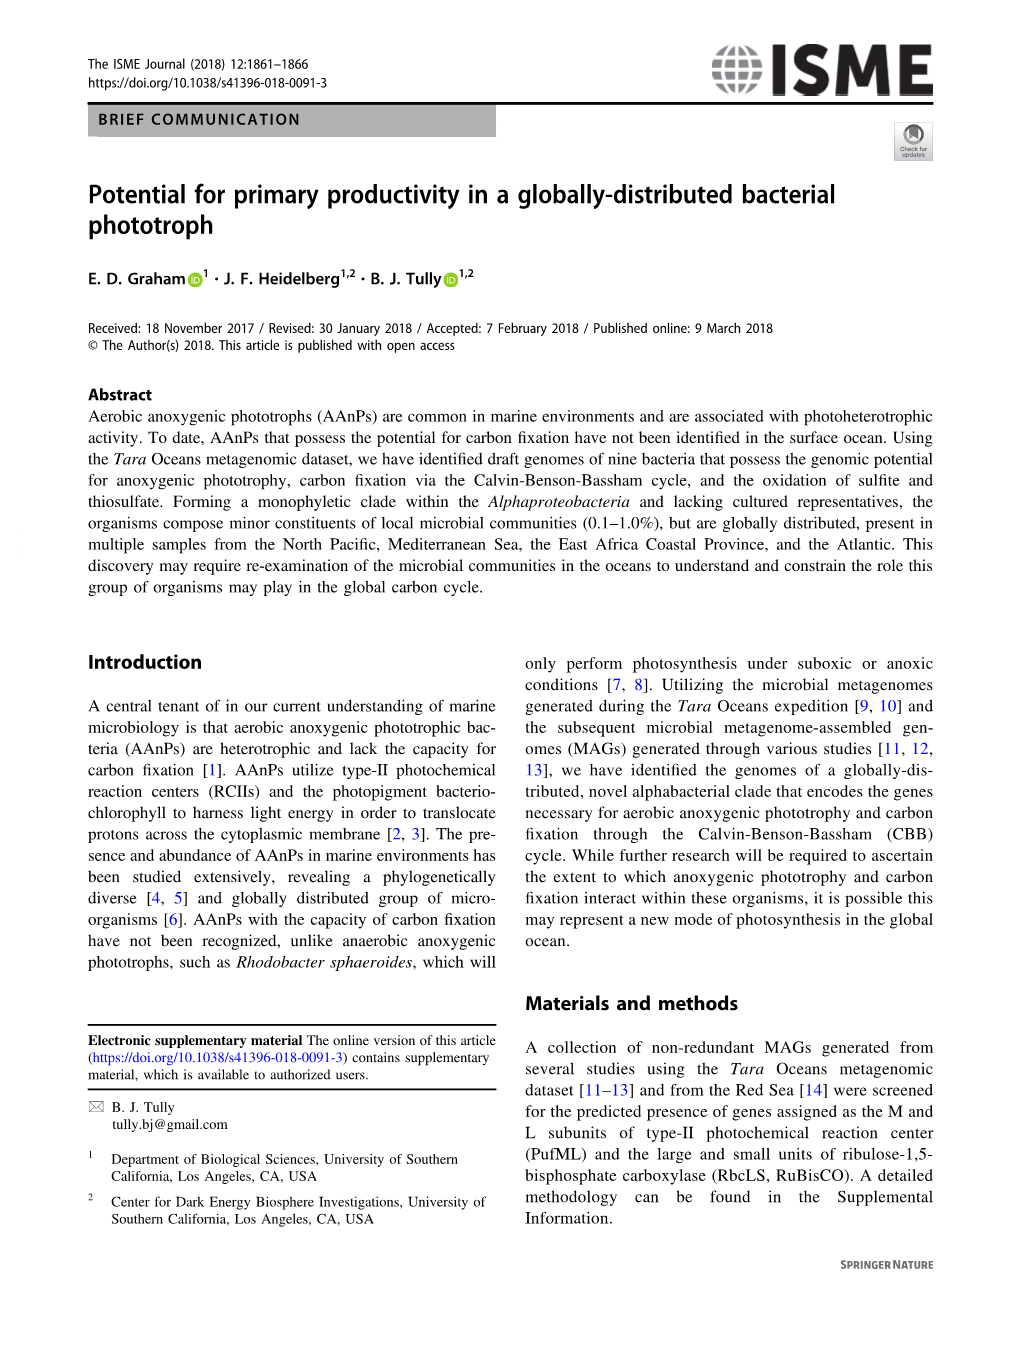 Potential for Primary Productivity in a Globally-Distributed Bacterial Phototroph